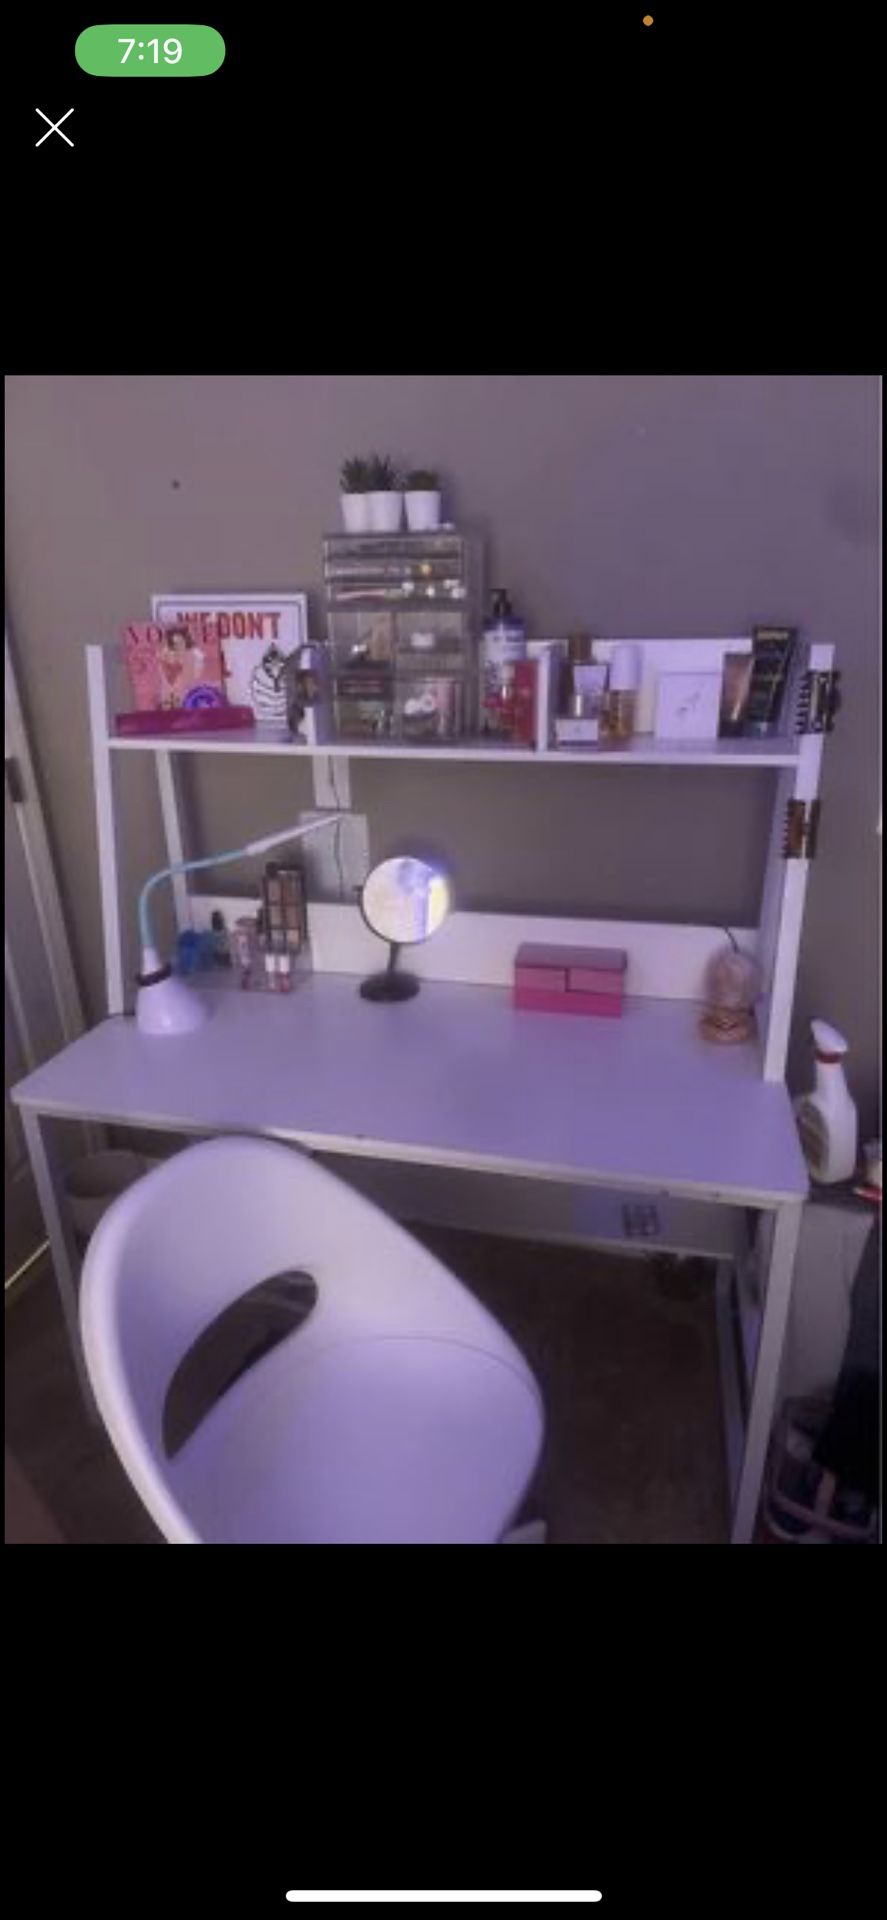 Super cute white desk with rolling chair